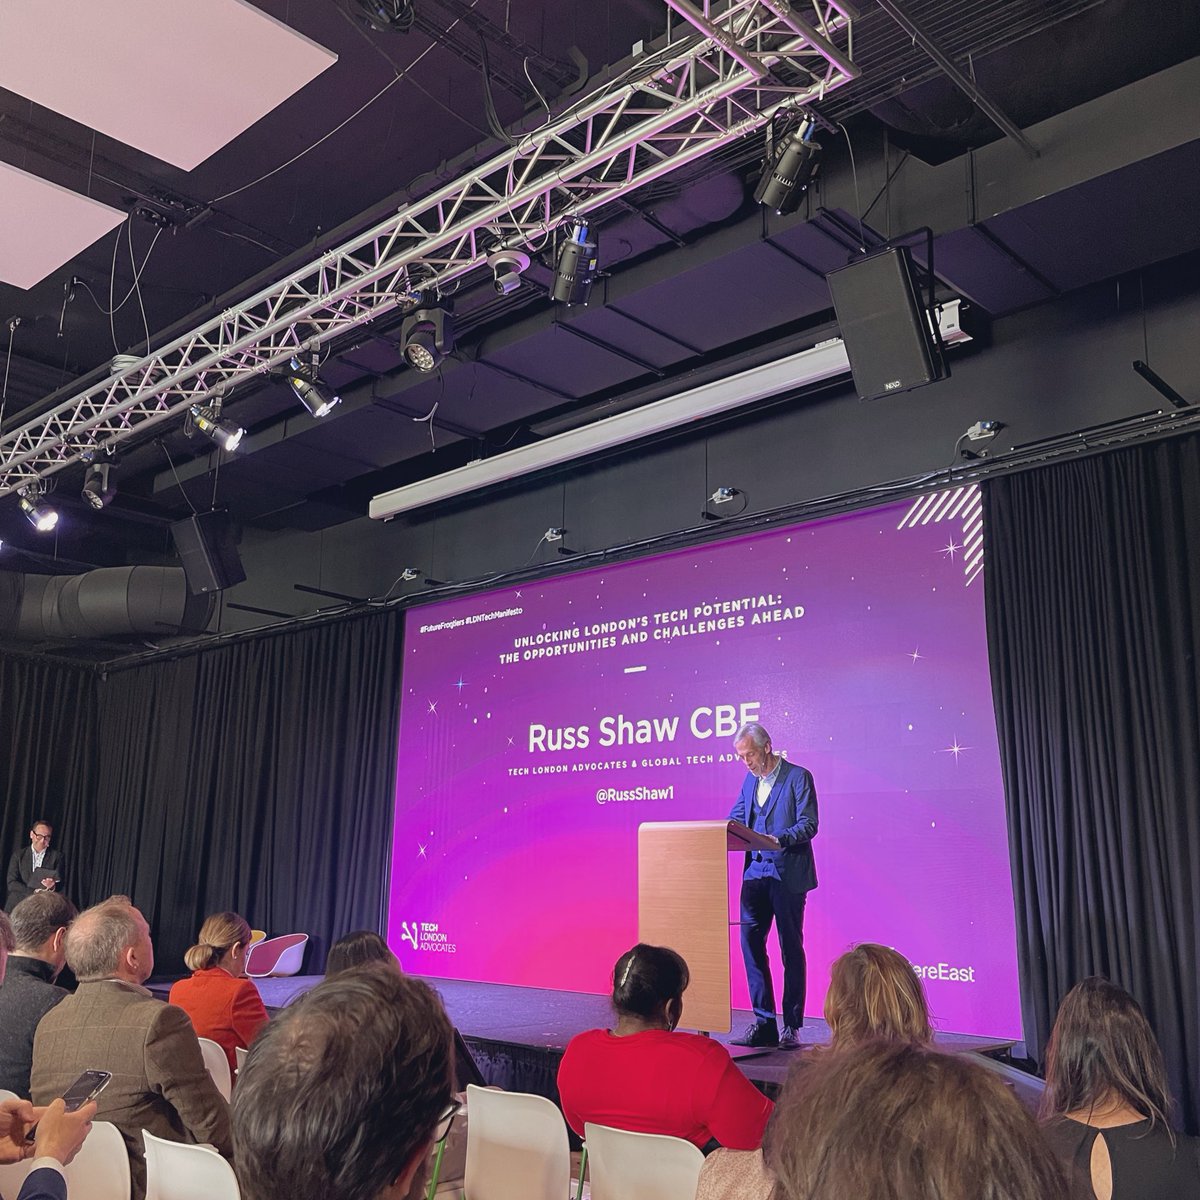 Always a pleasure to spend time with @TechLondonAdv — at @HereEast for #FutureFrontiers and the launch of #LDNTechManifesto as @RussShaw1 kicks things off with a word of warning not to be complacent about the continued world-leading success of the #London #tech ecosystem